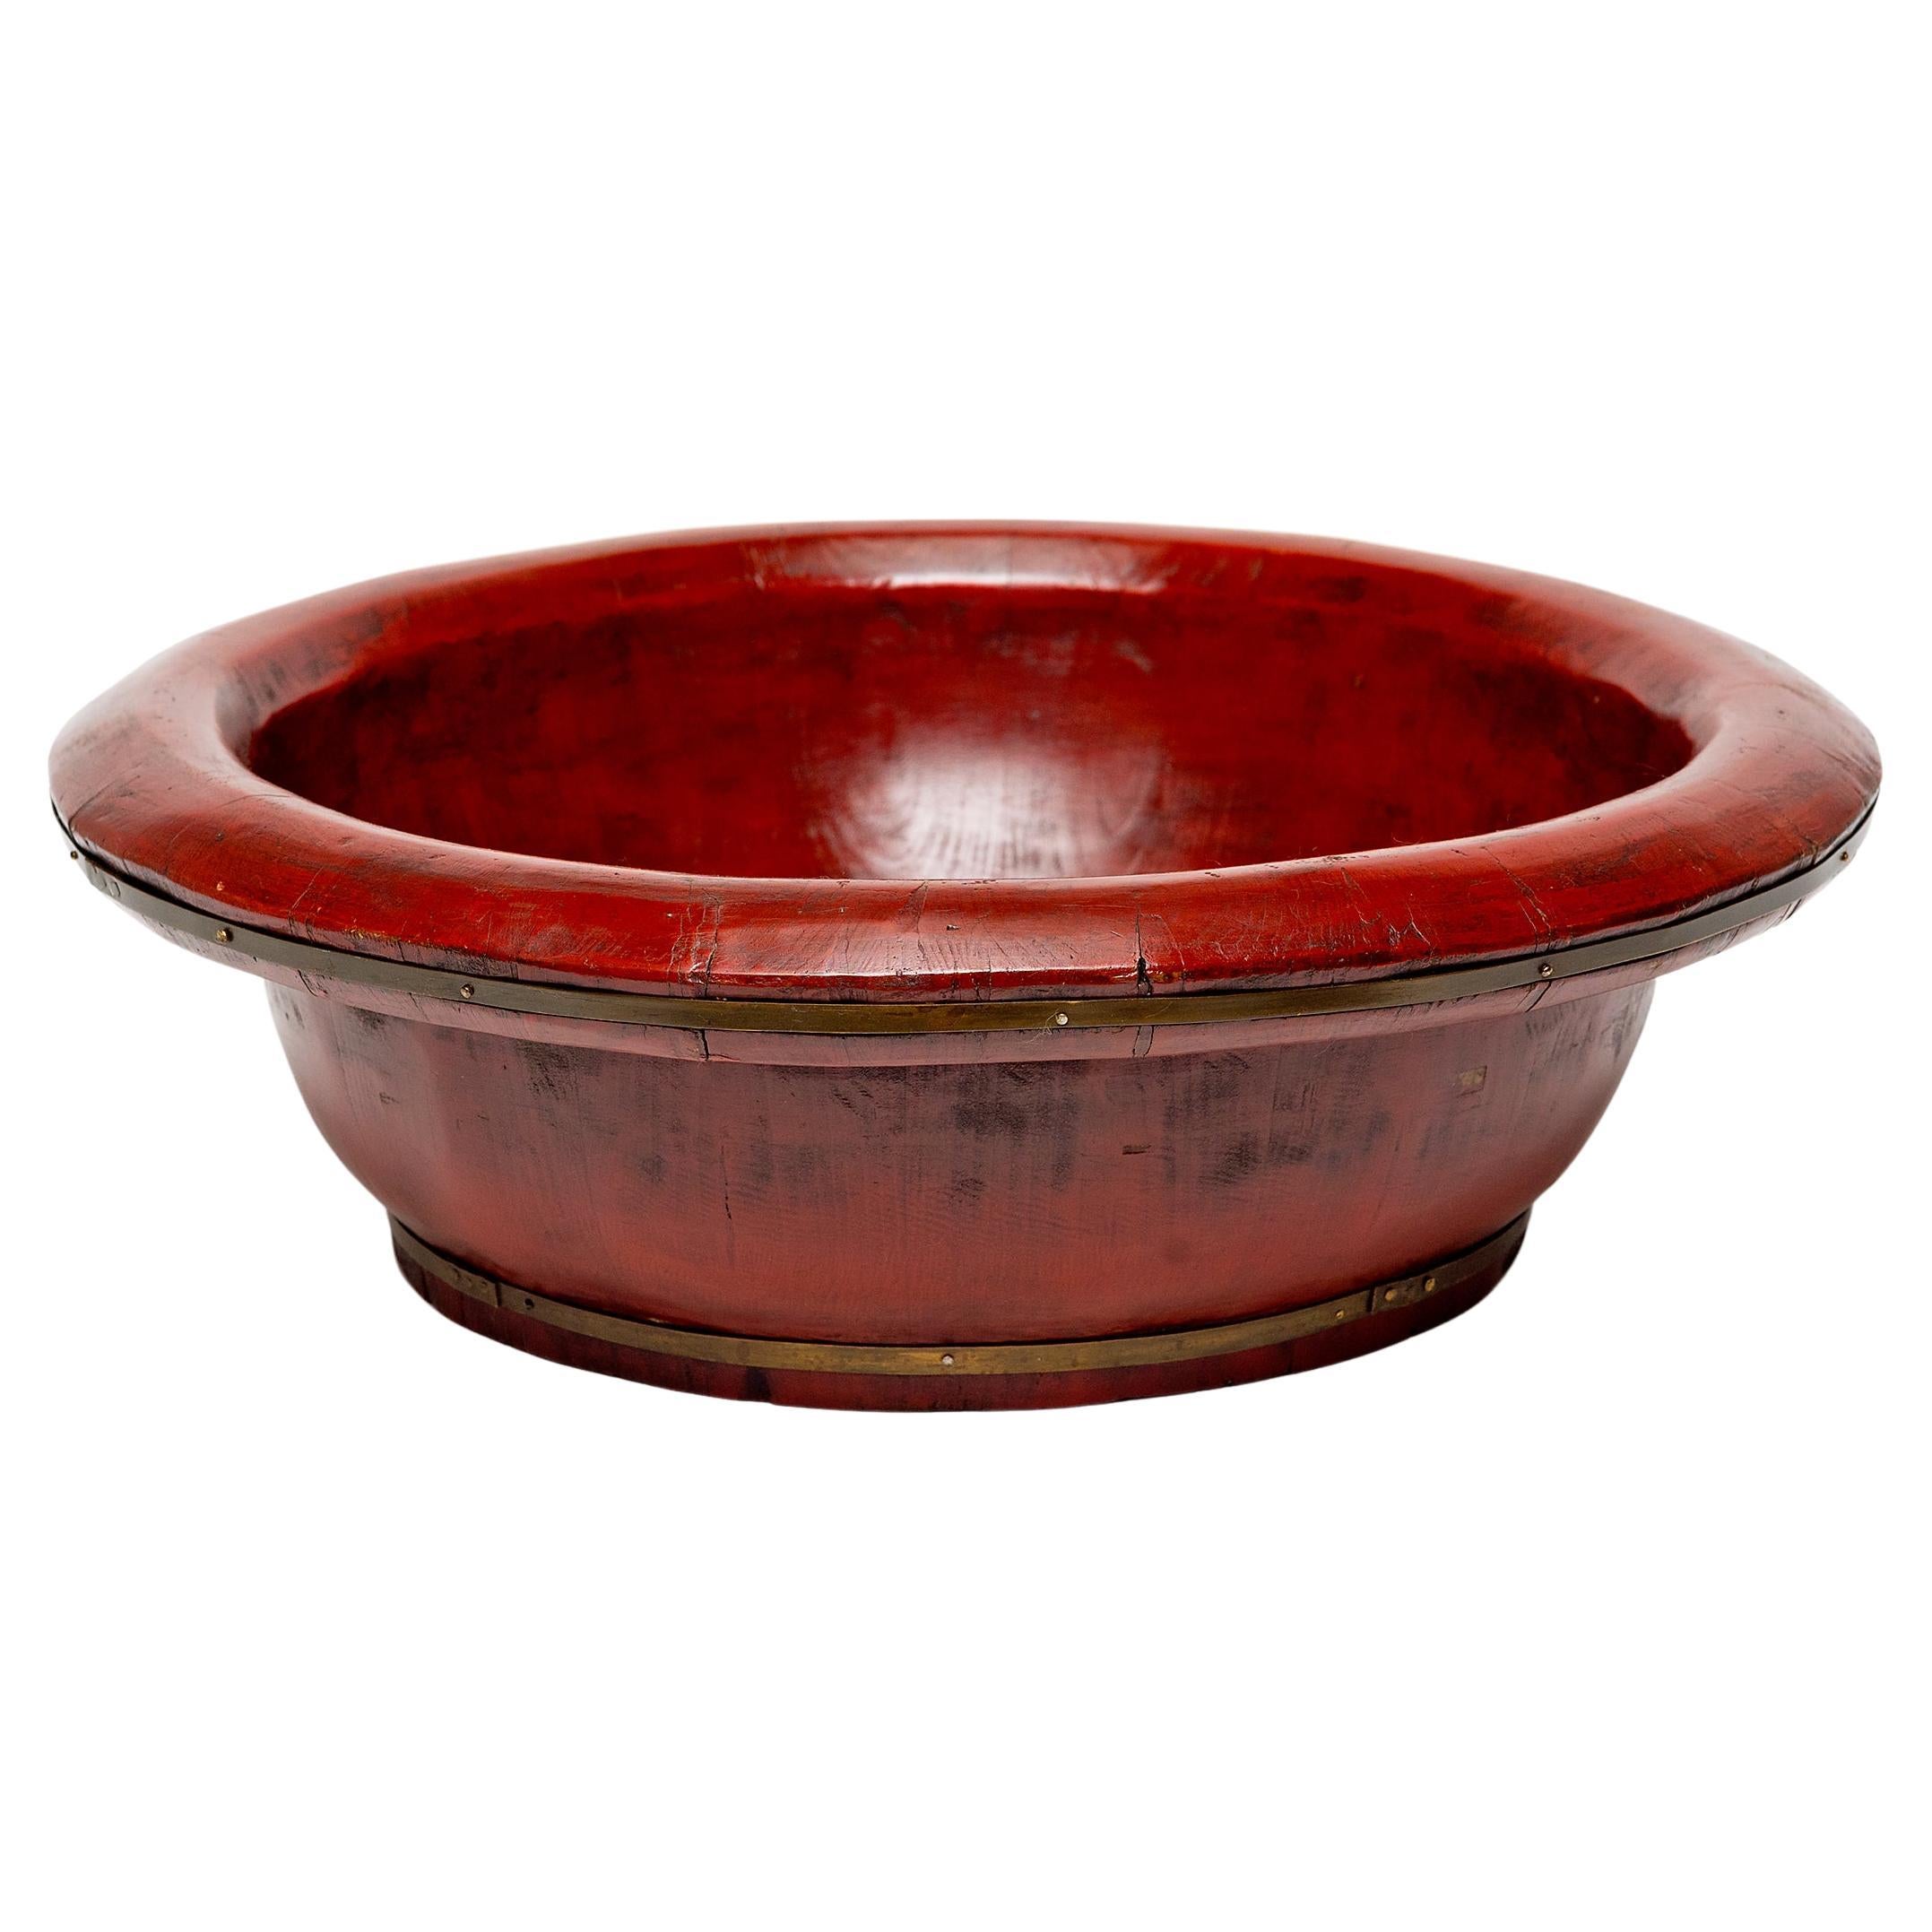 Chinese Red Lacquer Wash Basin, c. 1880